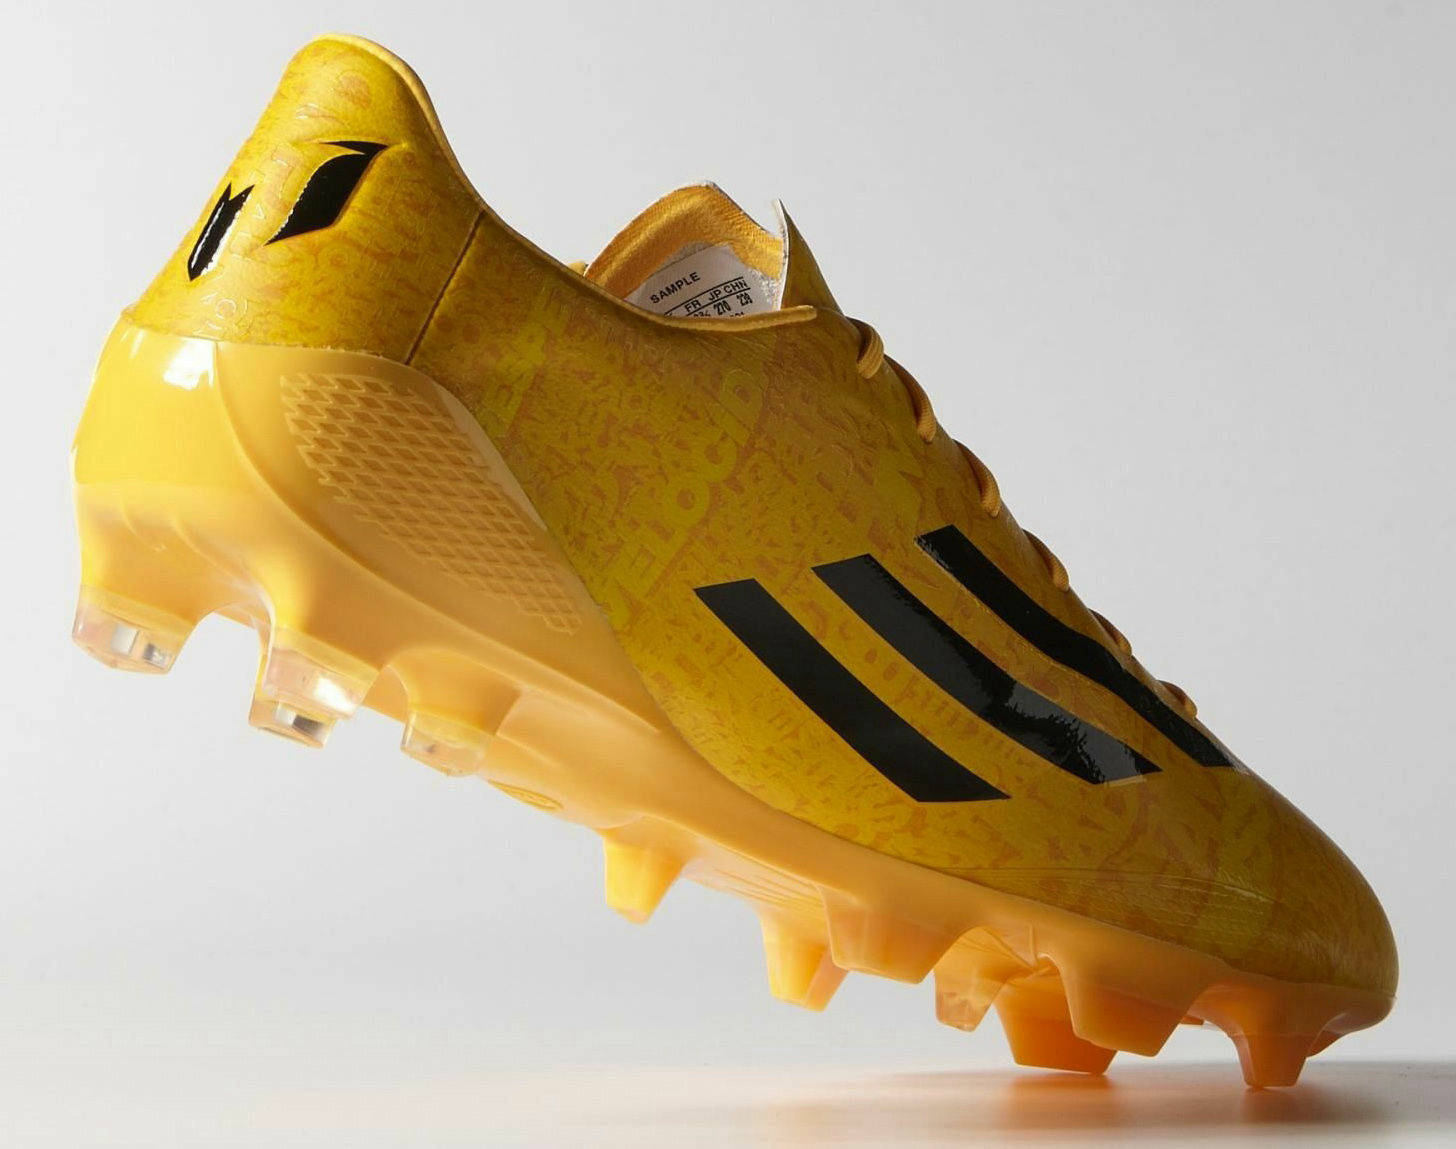 messi shoes 2015